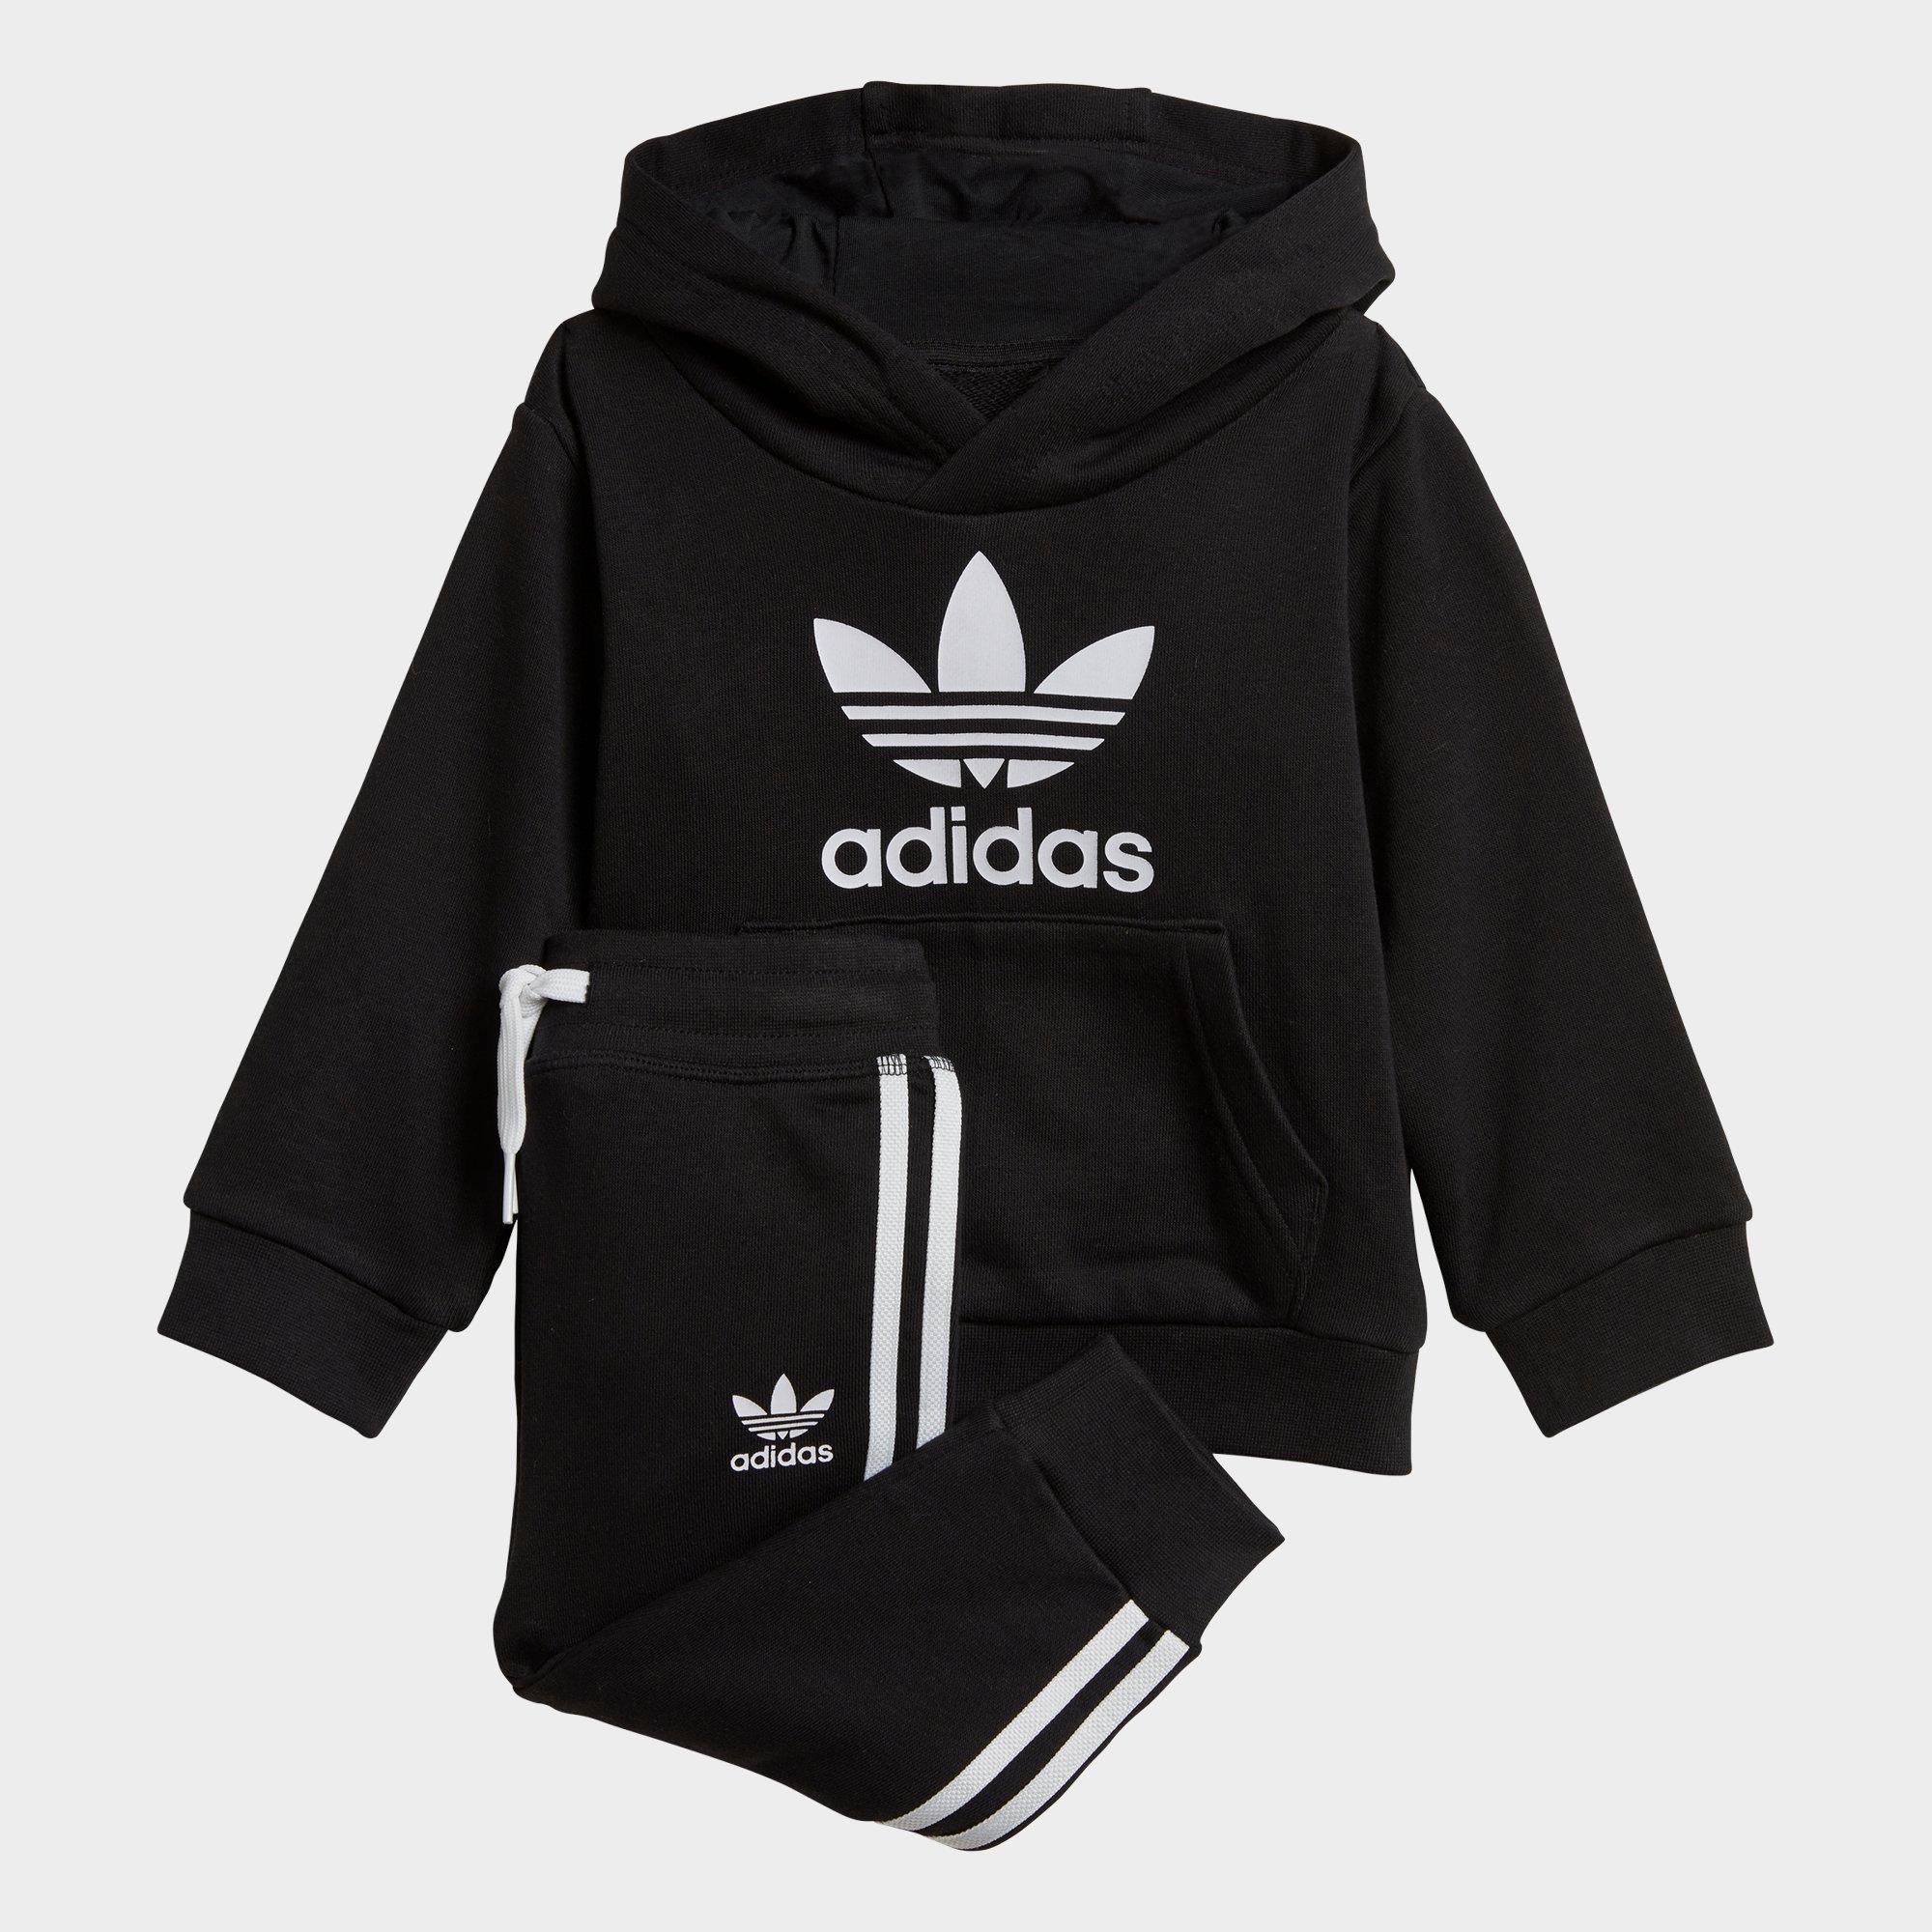 adidas clothing for toddlers